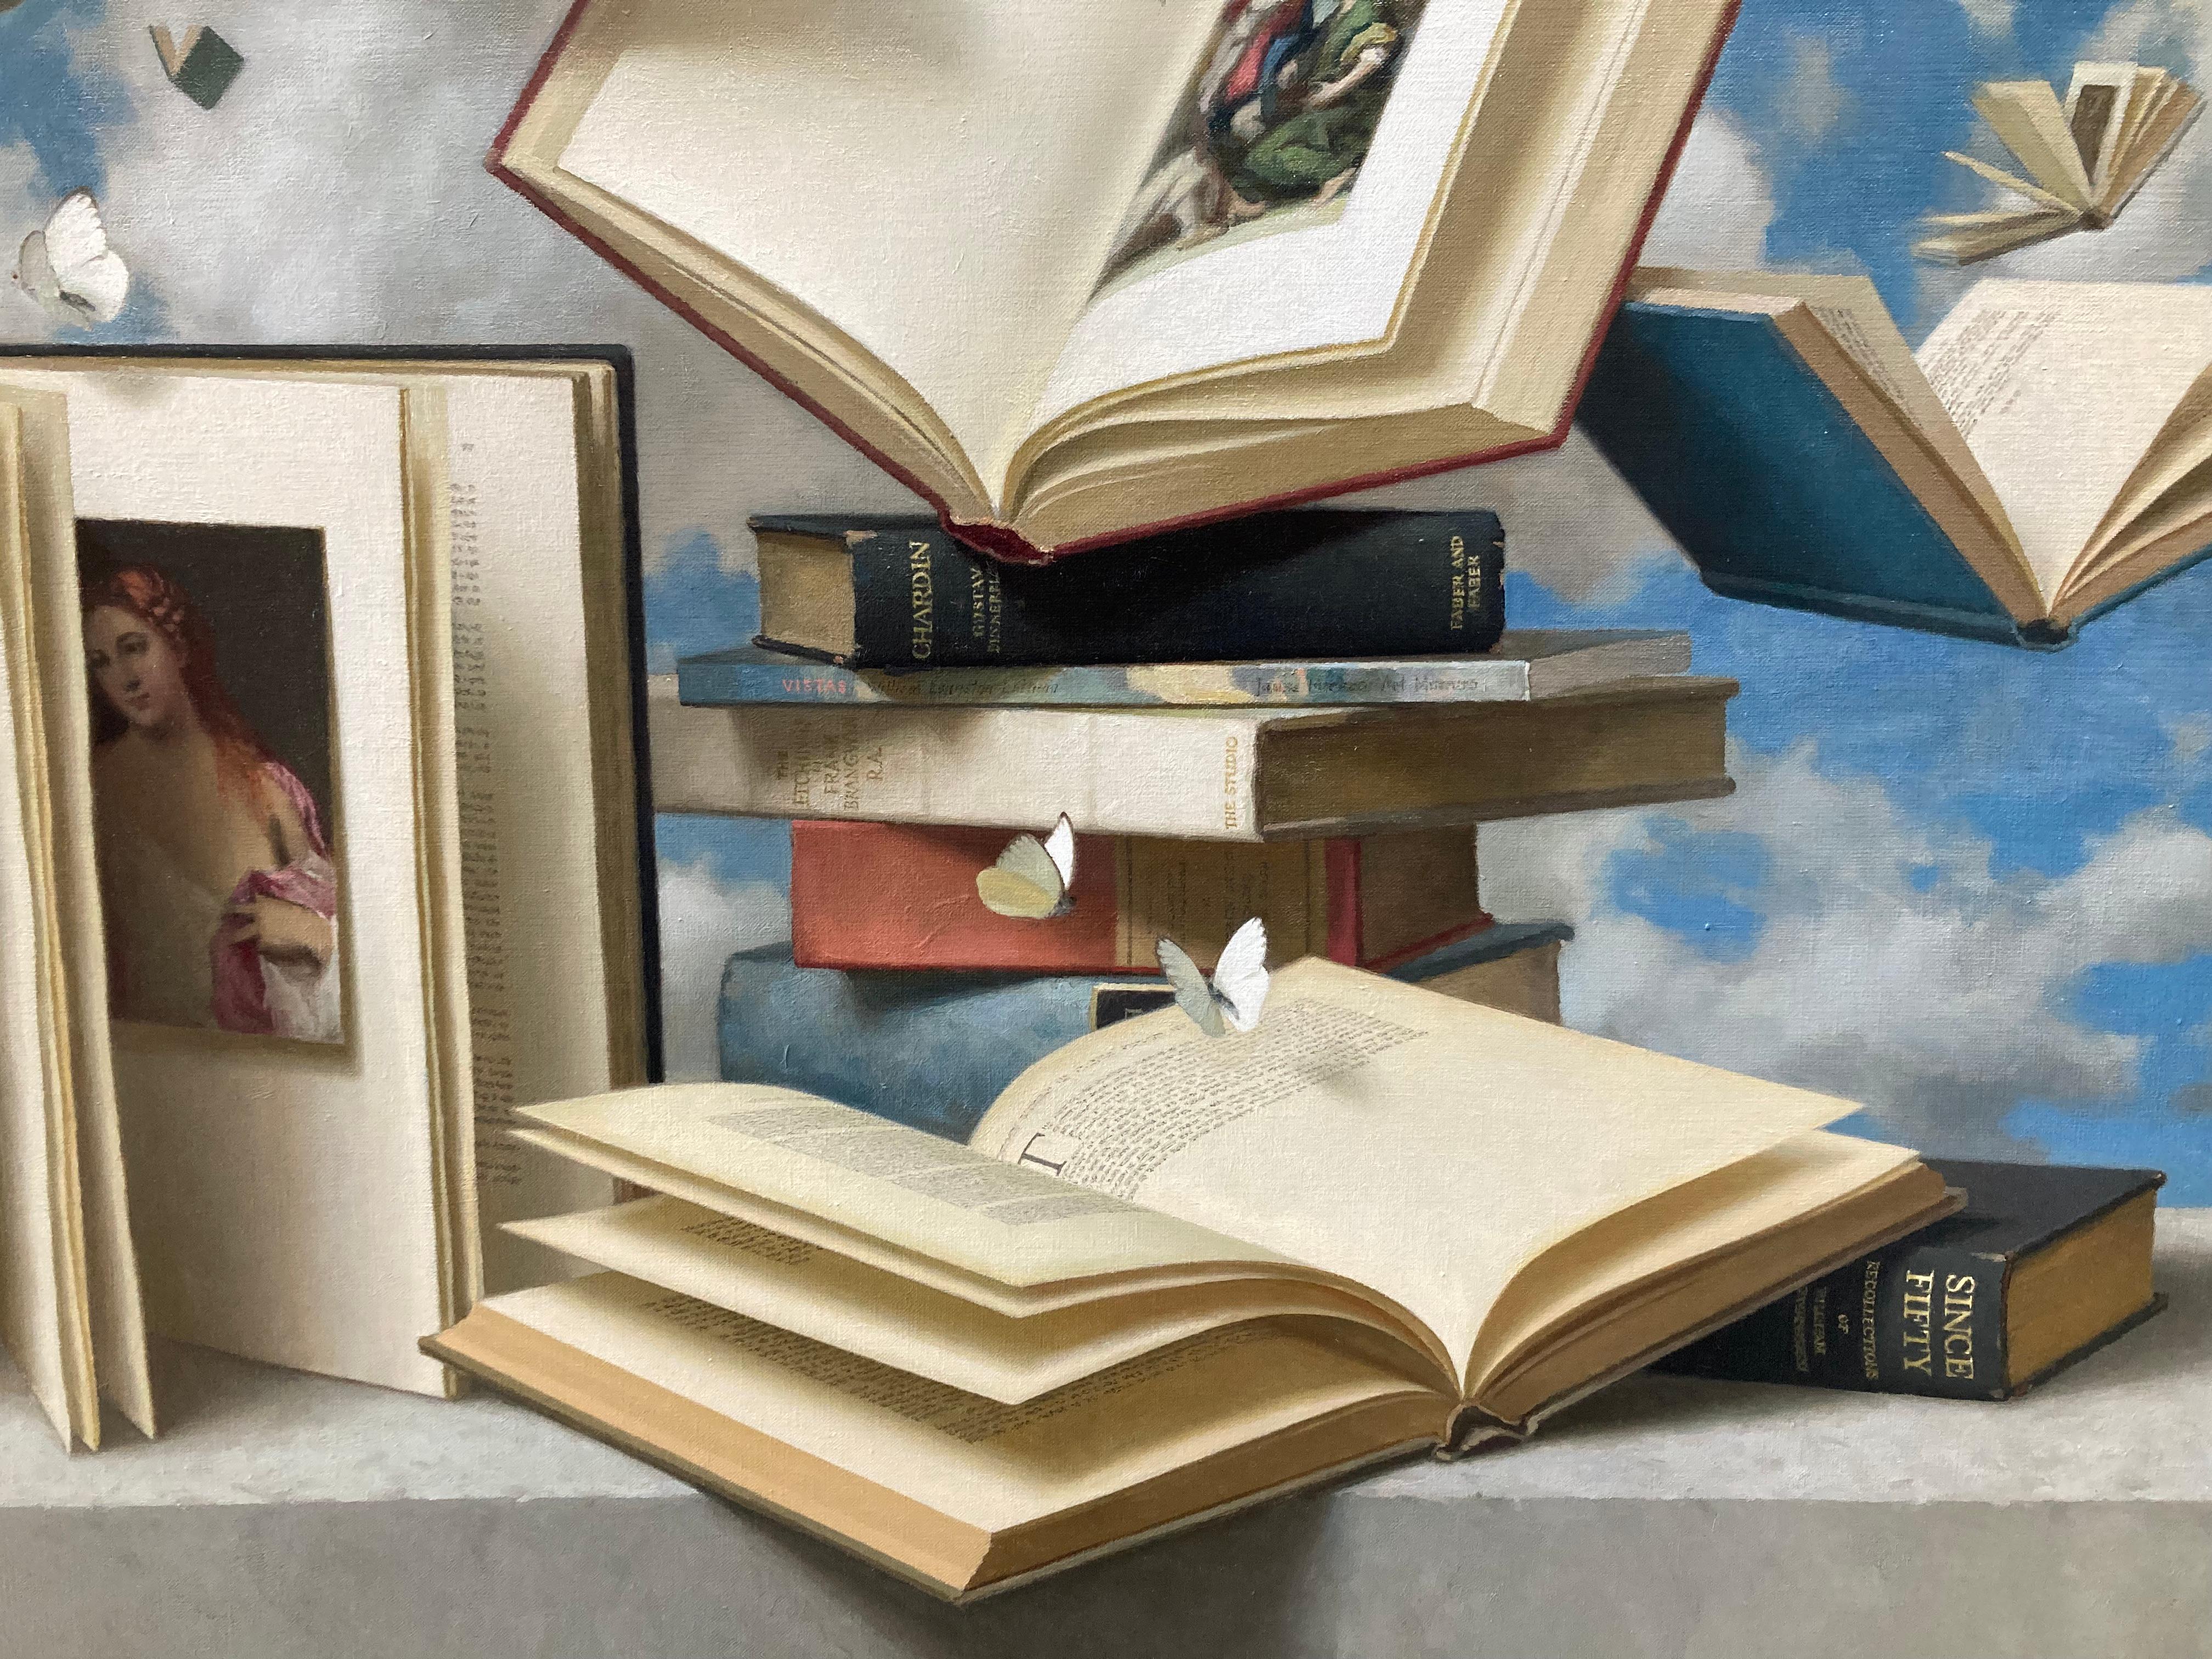 Floating Books and Butterflies - 2023 Surrealist still life and skyscape 11